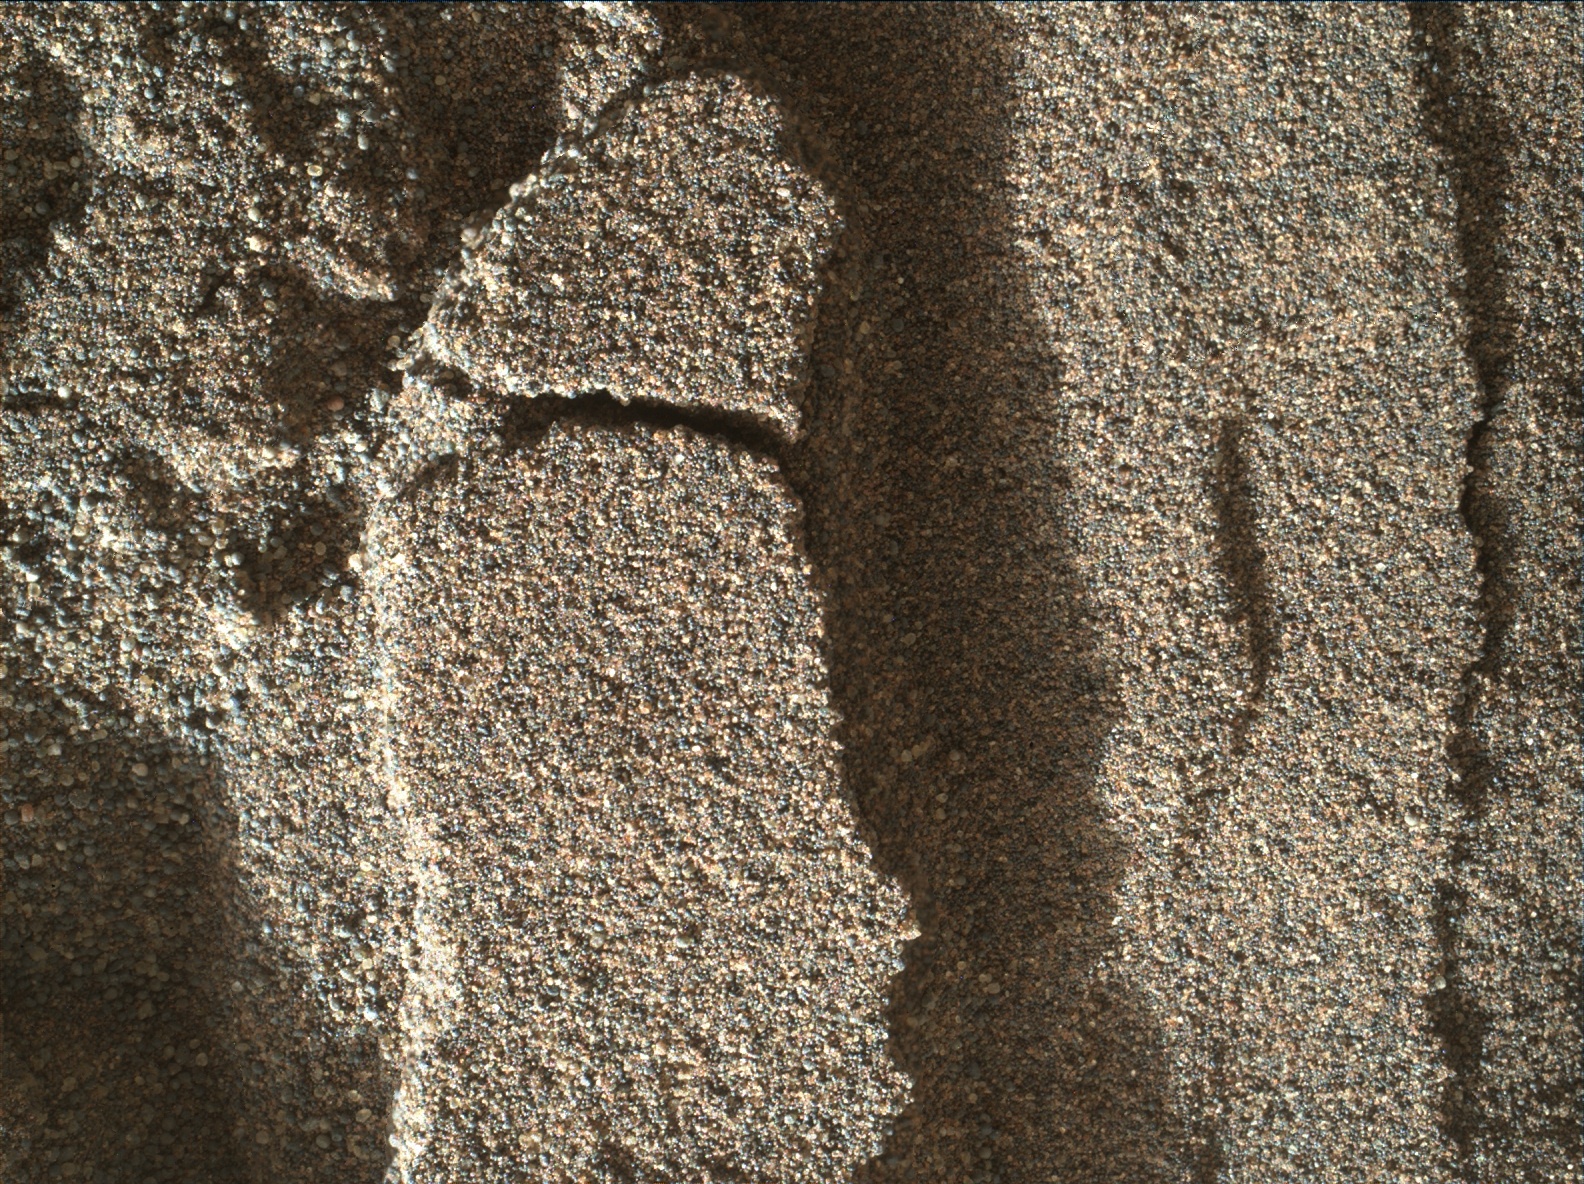 In an up-close 1-inch-wide view, grains of sand near a Martian sand dune are imaged by the arm camera on NASA's Mars rover Curiosity Mars rover.